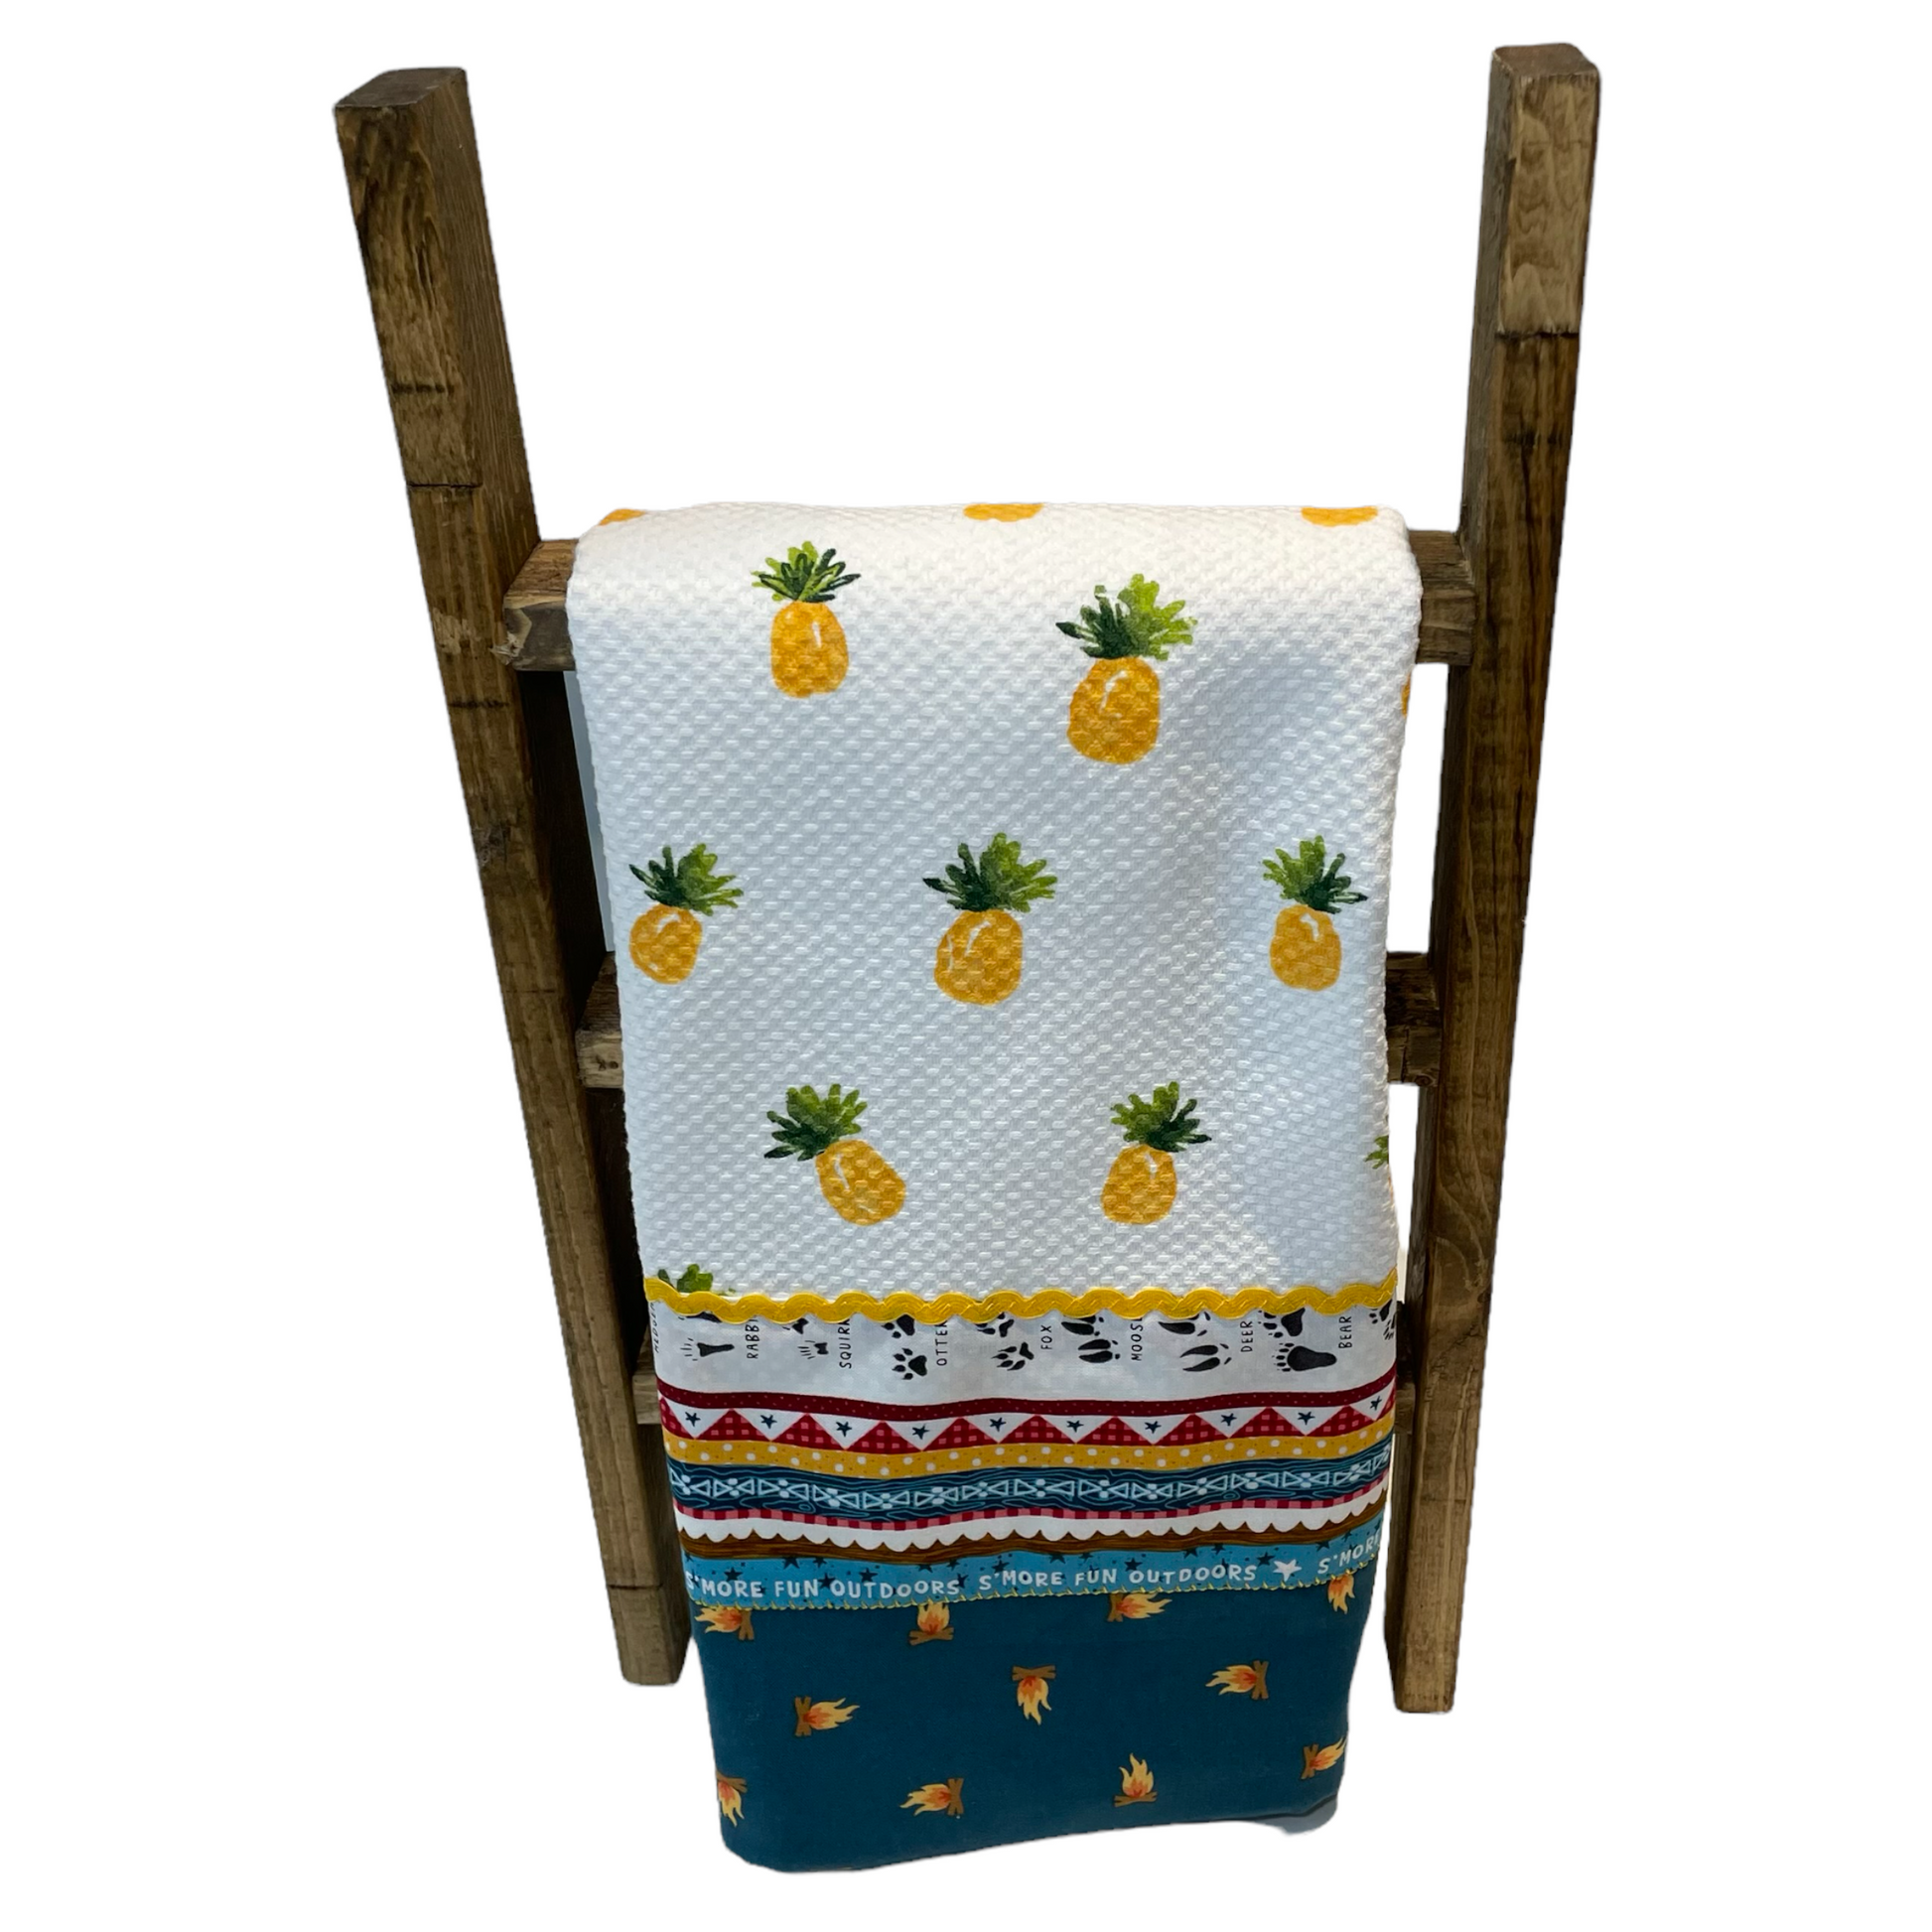 Pineapple Themed Camping Dish Towel.  Dress up your home away from home with coordinated glamping decor.  Cute Yellow and teal accented dish towel. Part of a mix and match collection.  Shop your favorites online or follow along on the Home Stitchery Decor YouTube Channel.